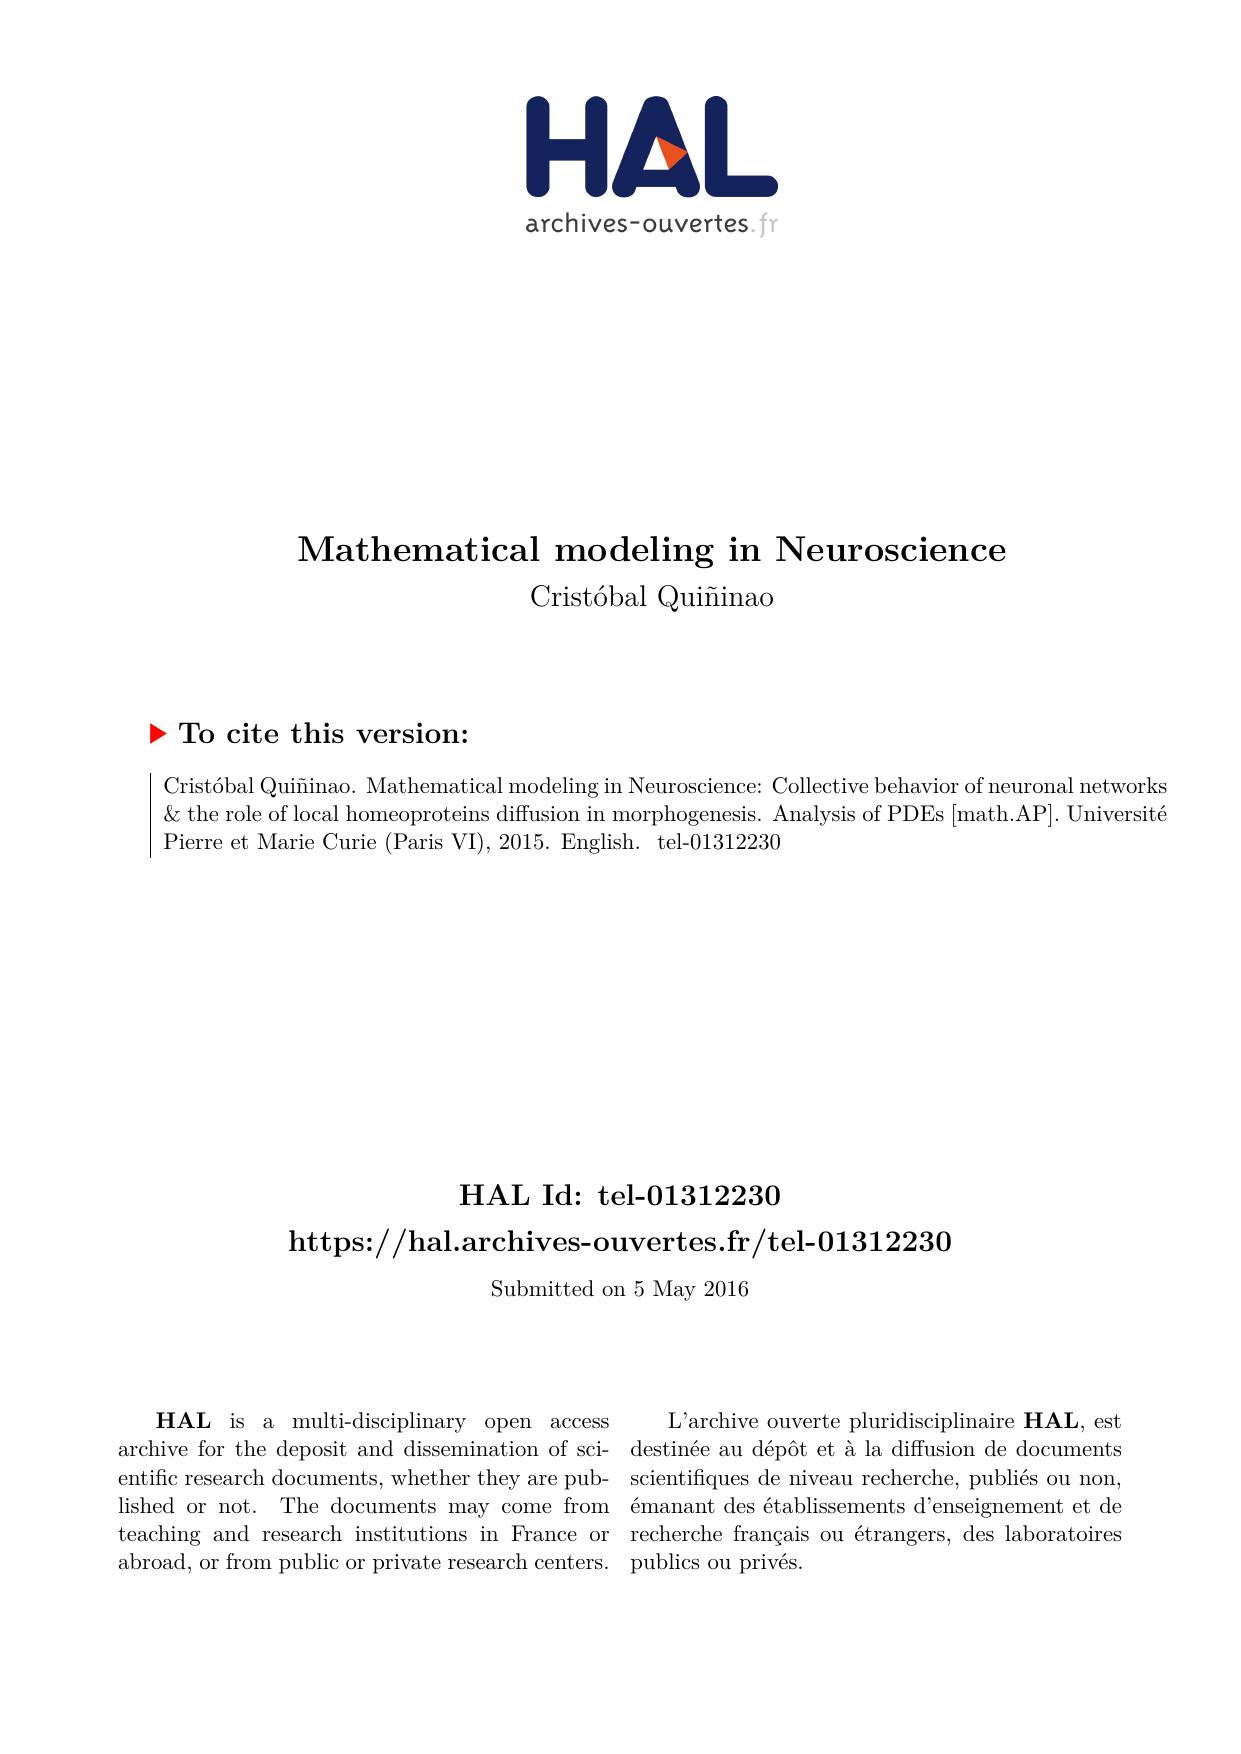 Mathematical modeling in Neuroscience